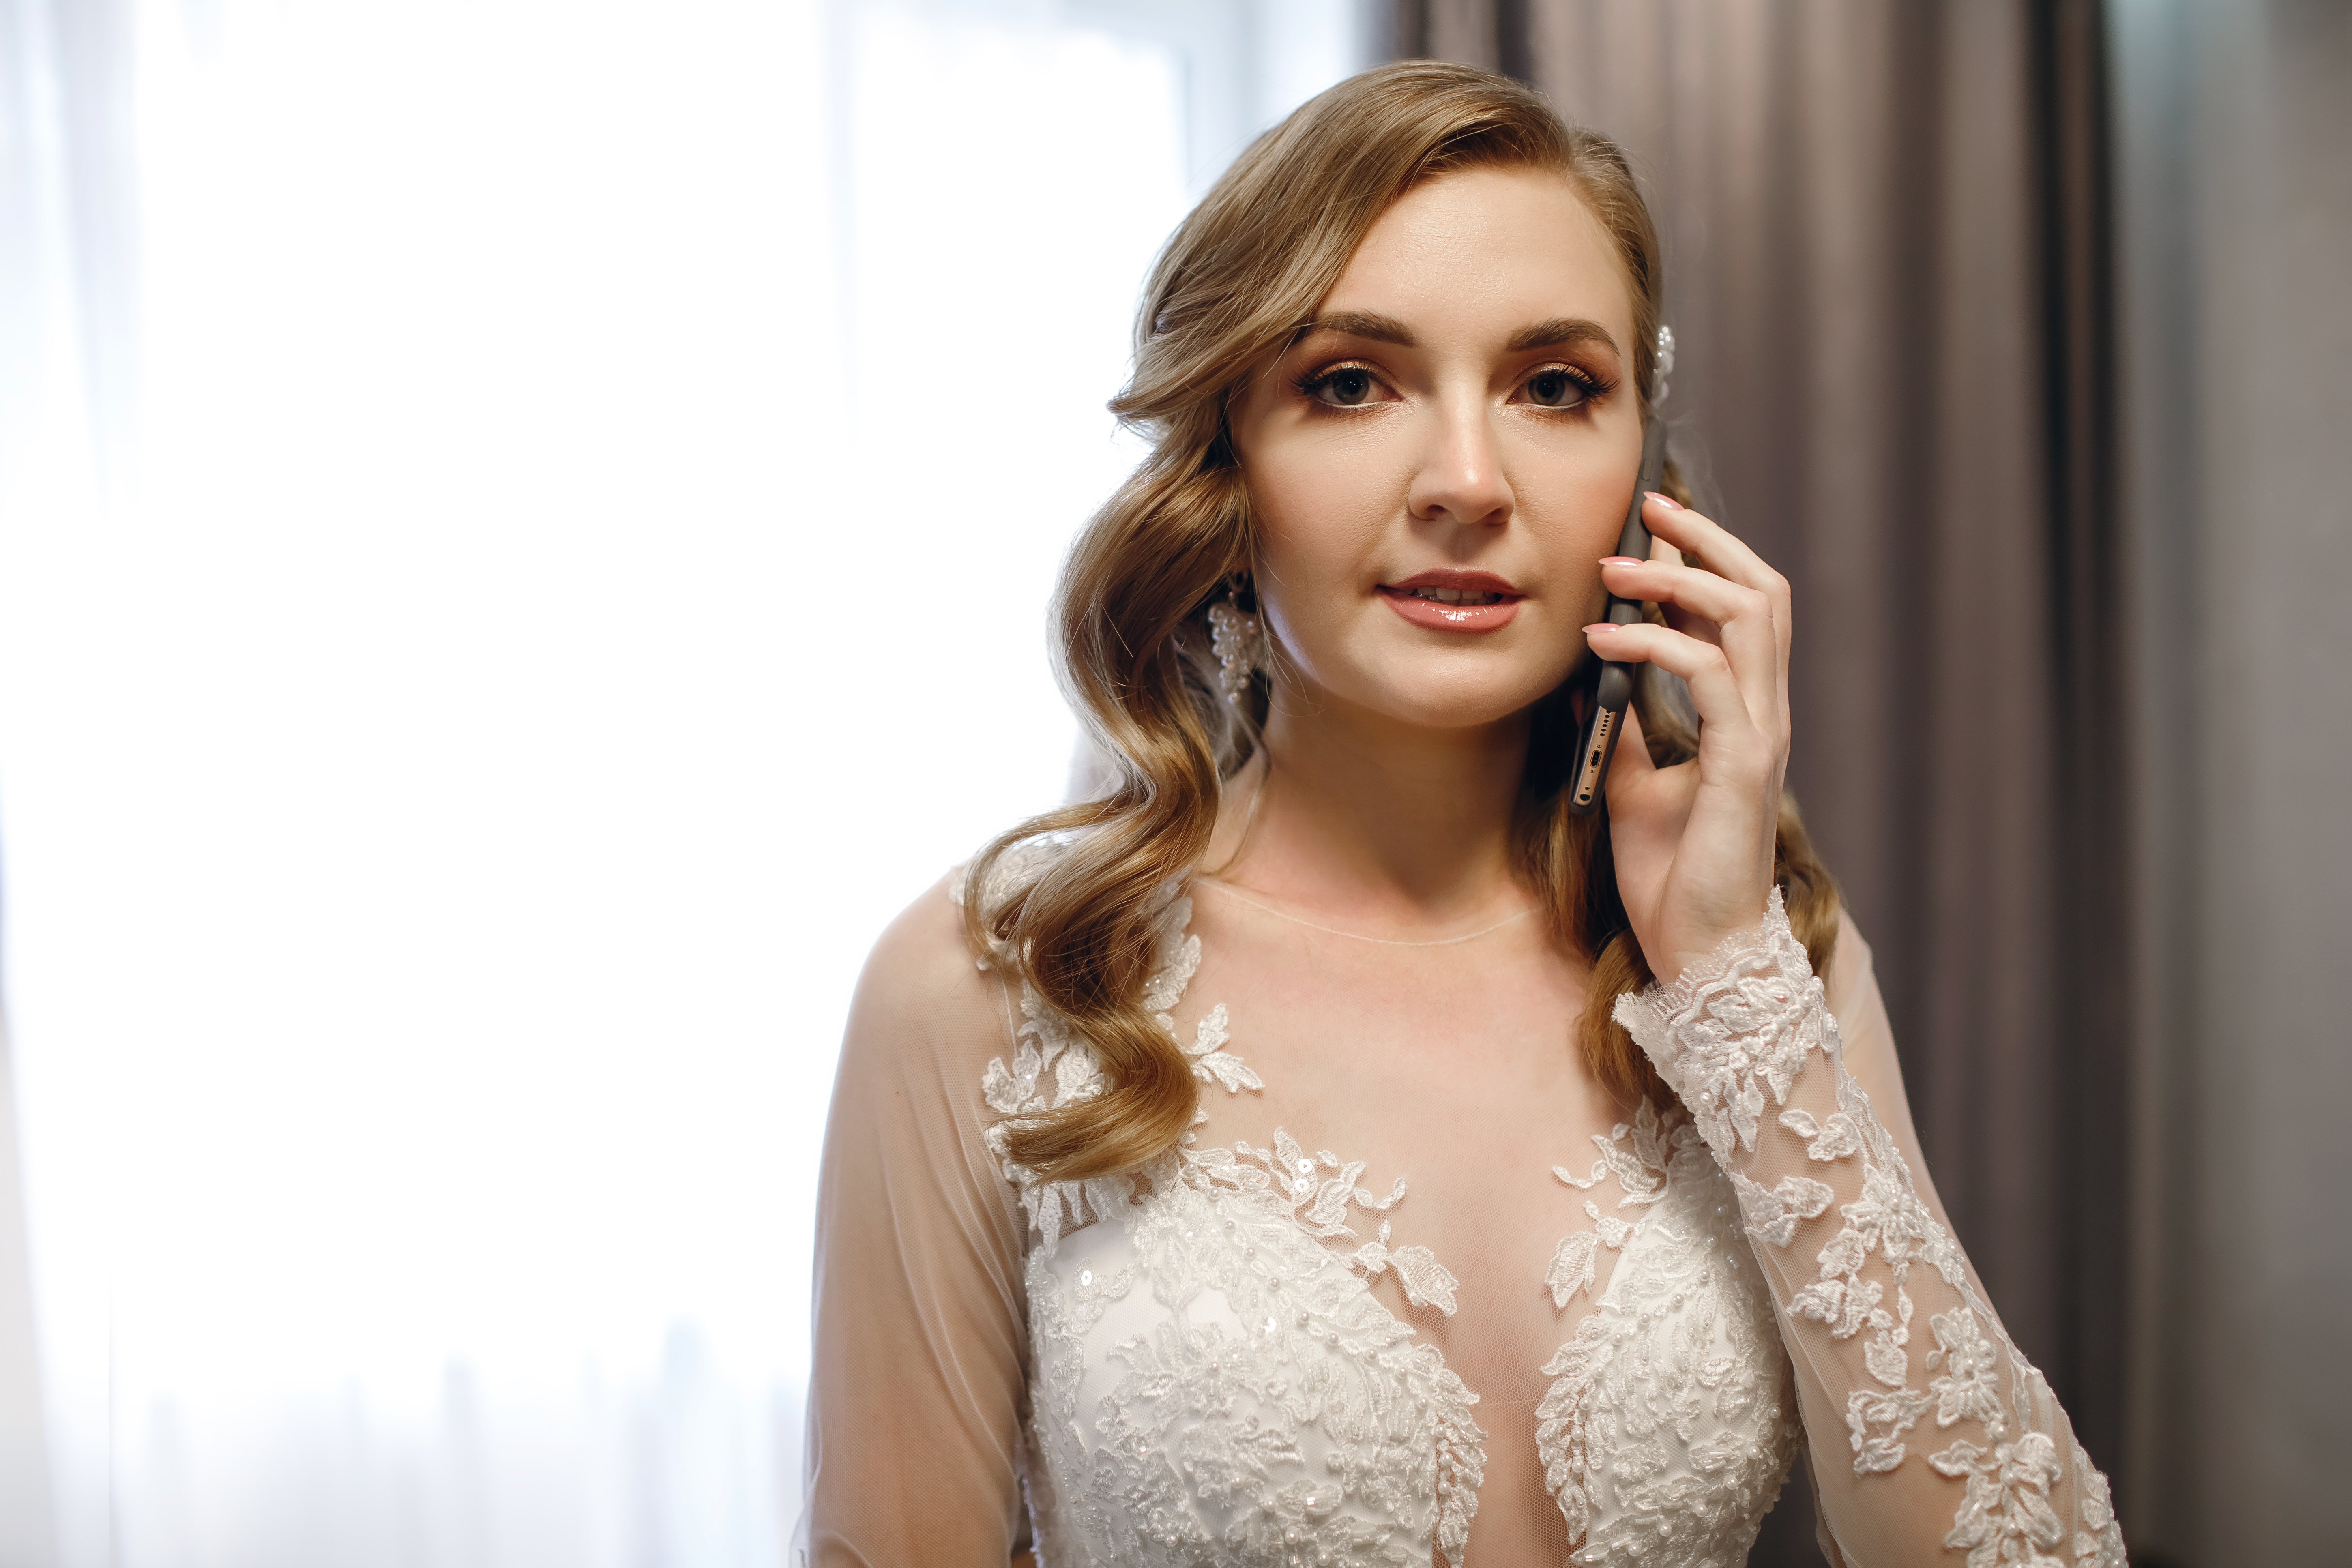 A bride attending to a phone call | Source: Shutterstock